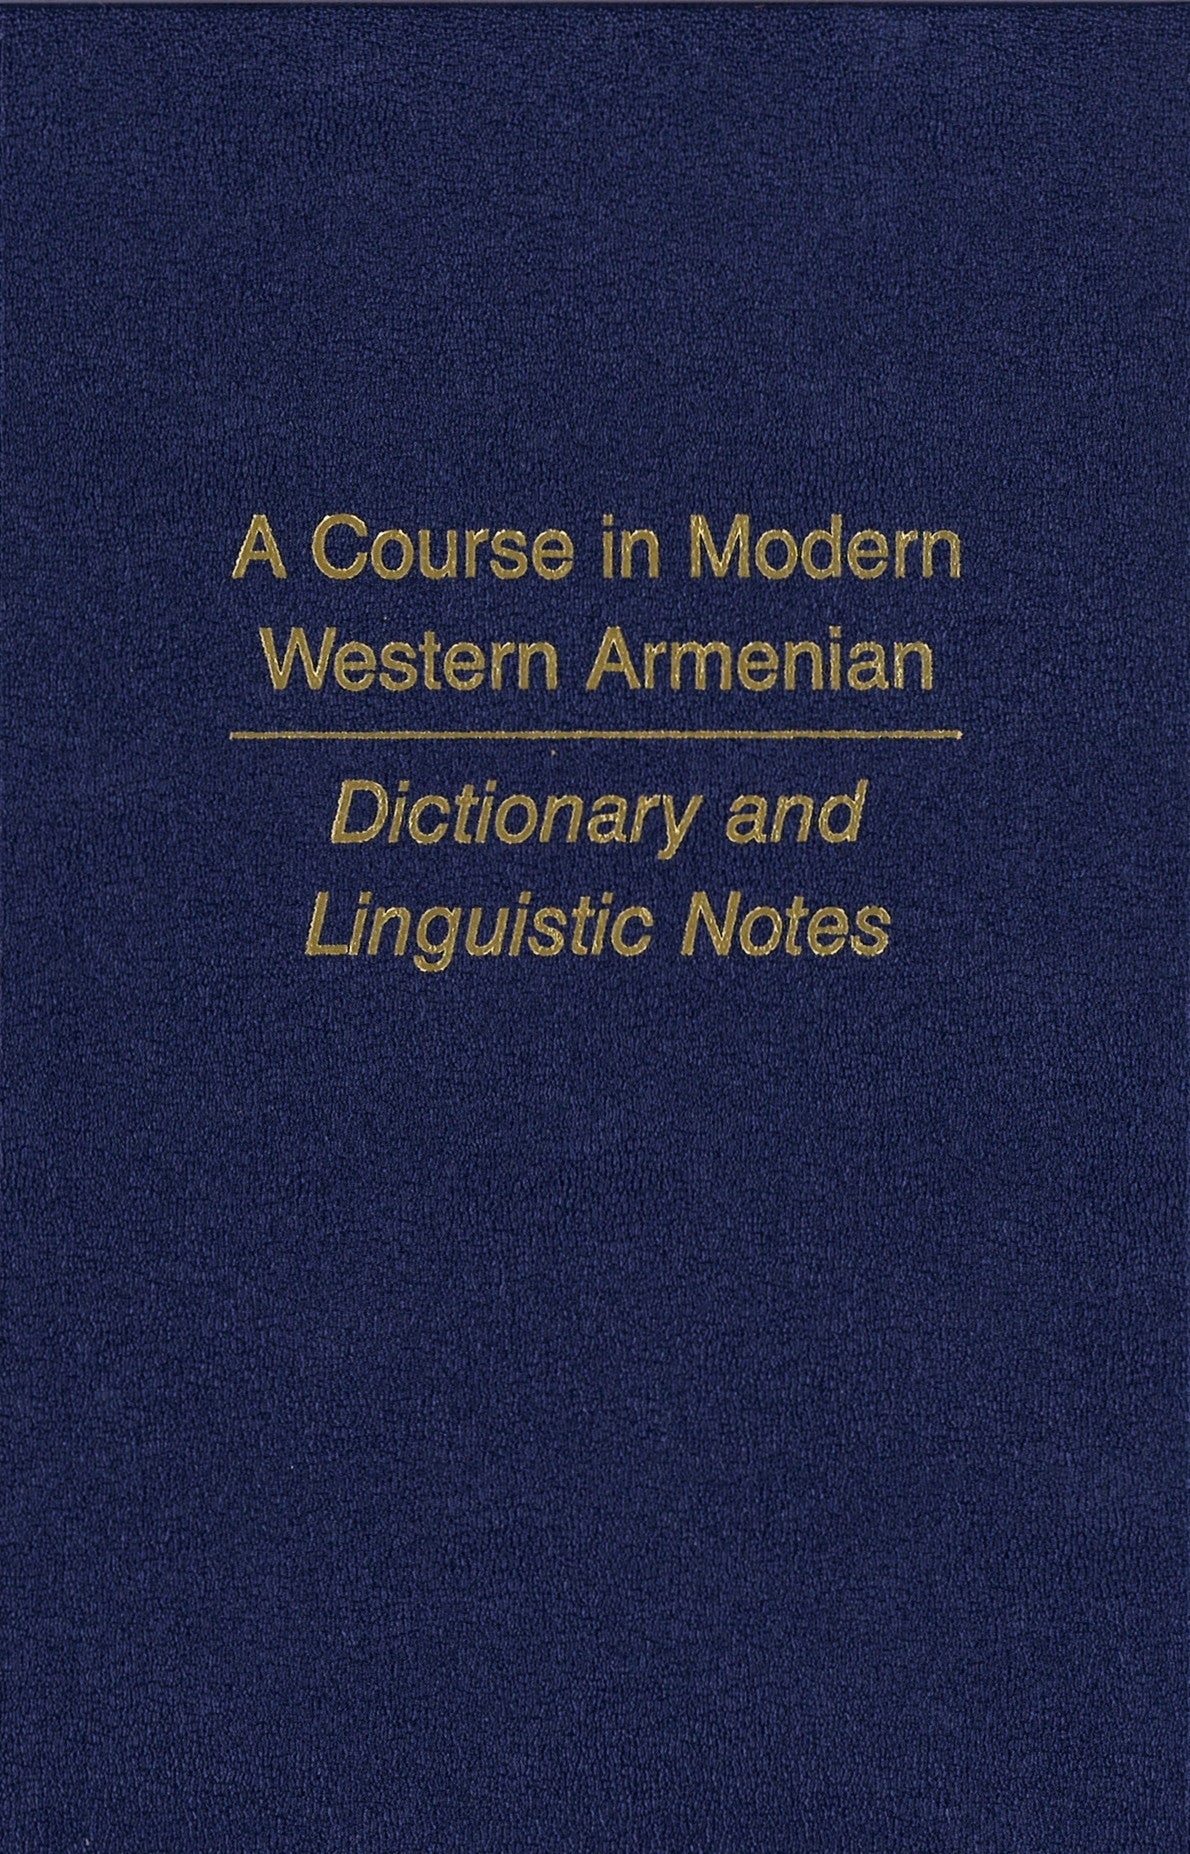 A COURSE IN MODERN WESTERN ARMENIAN: Dictionary and Linguistic Notes